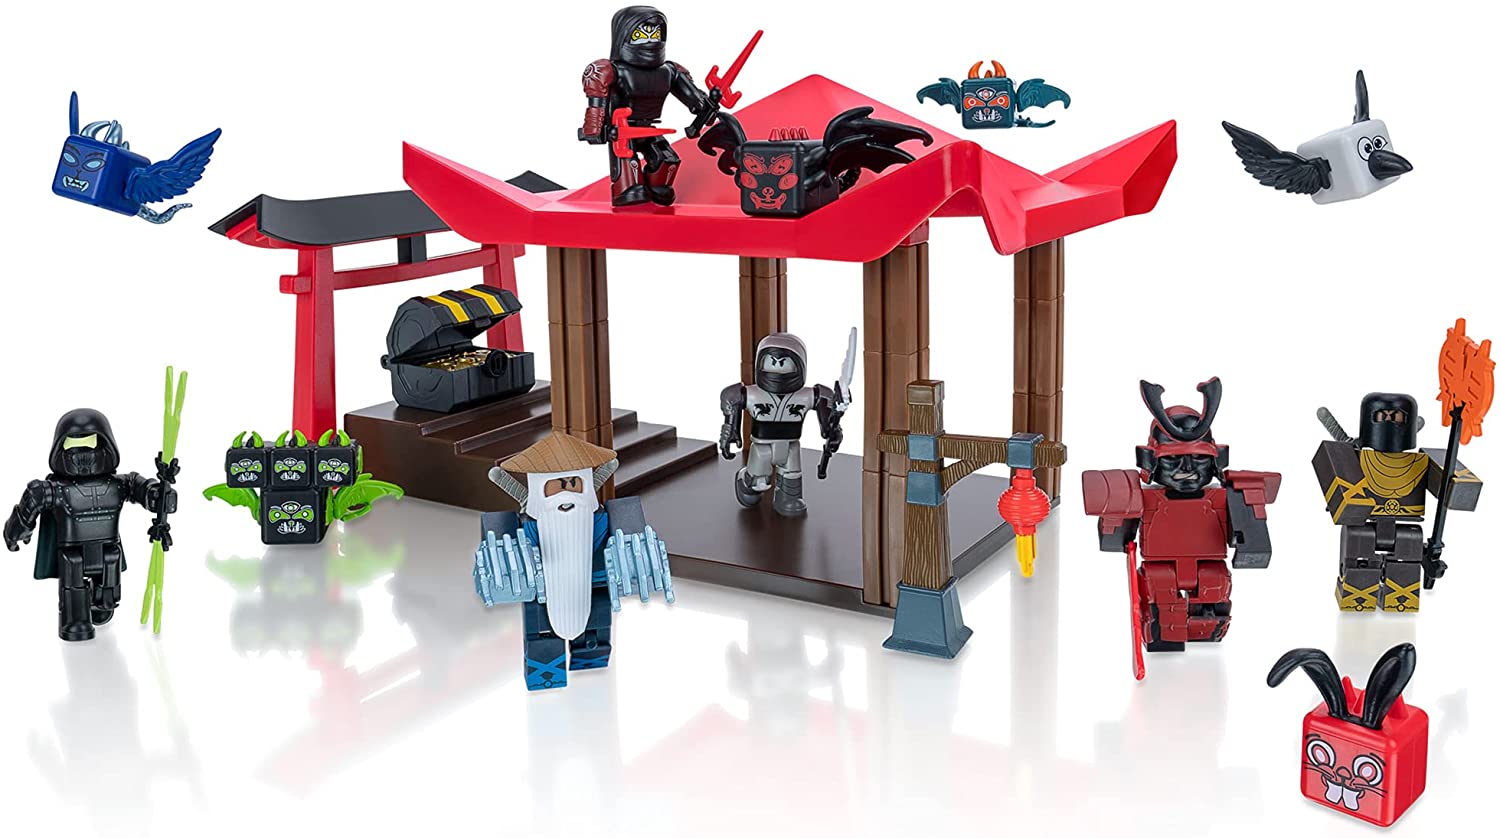 Roblox Action Collection - Ninja Legends Deluxe Kids' Playset w/ Exclusive Virtual Item $15.11 + Free Shipping w/ Prime or on $25+